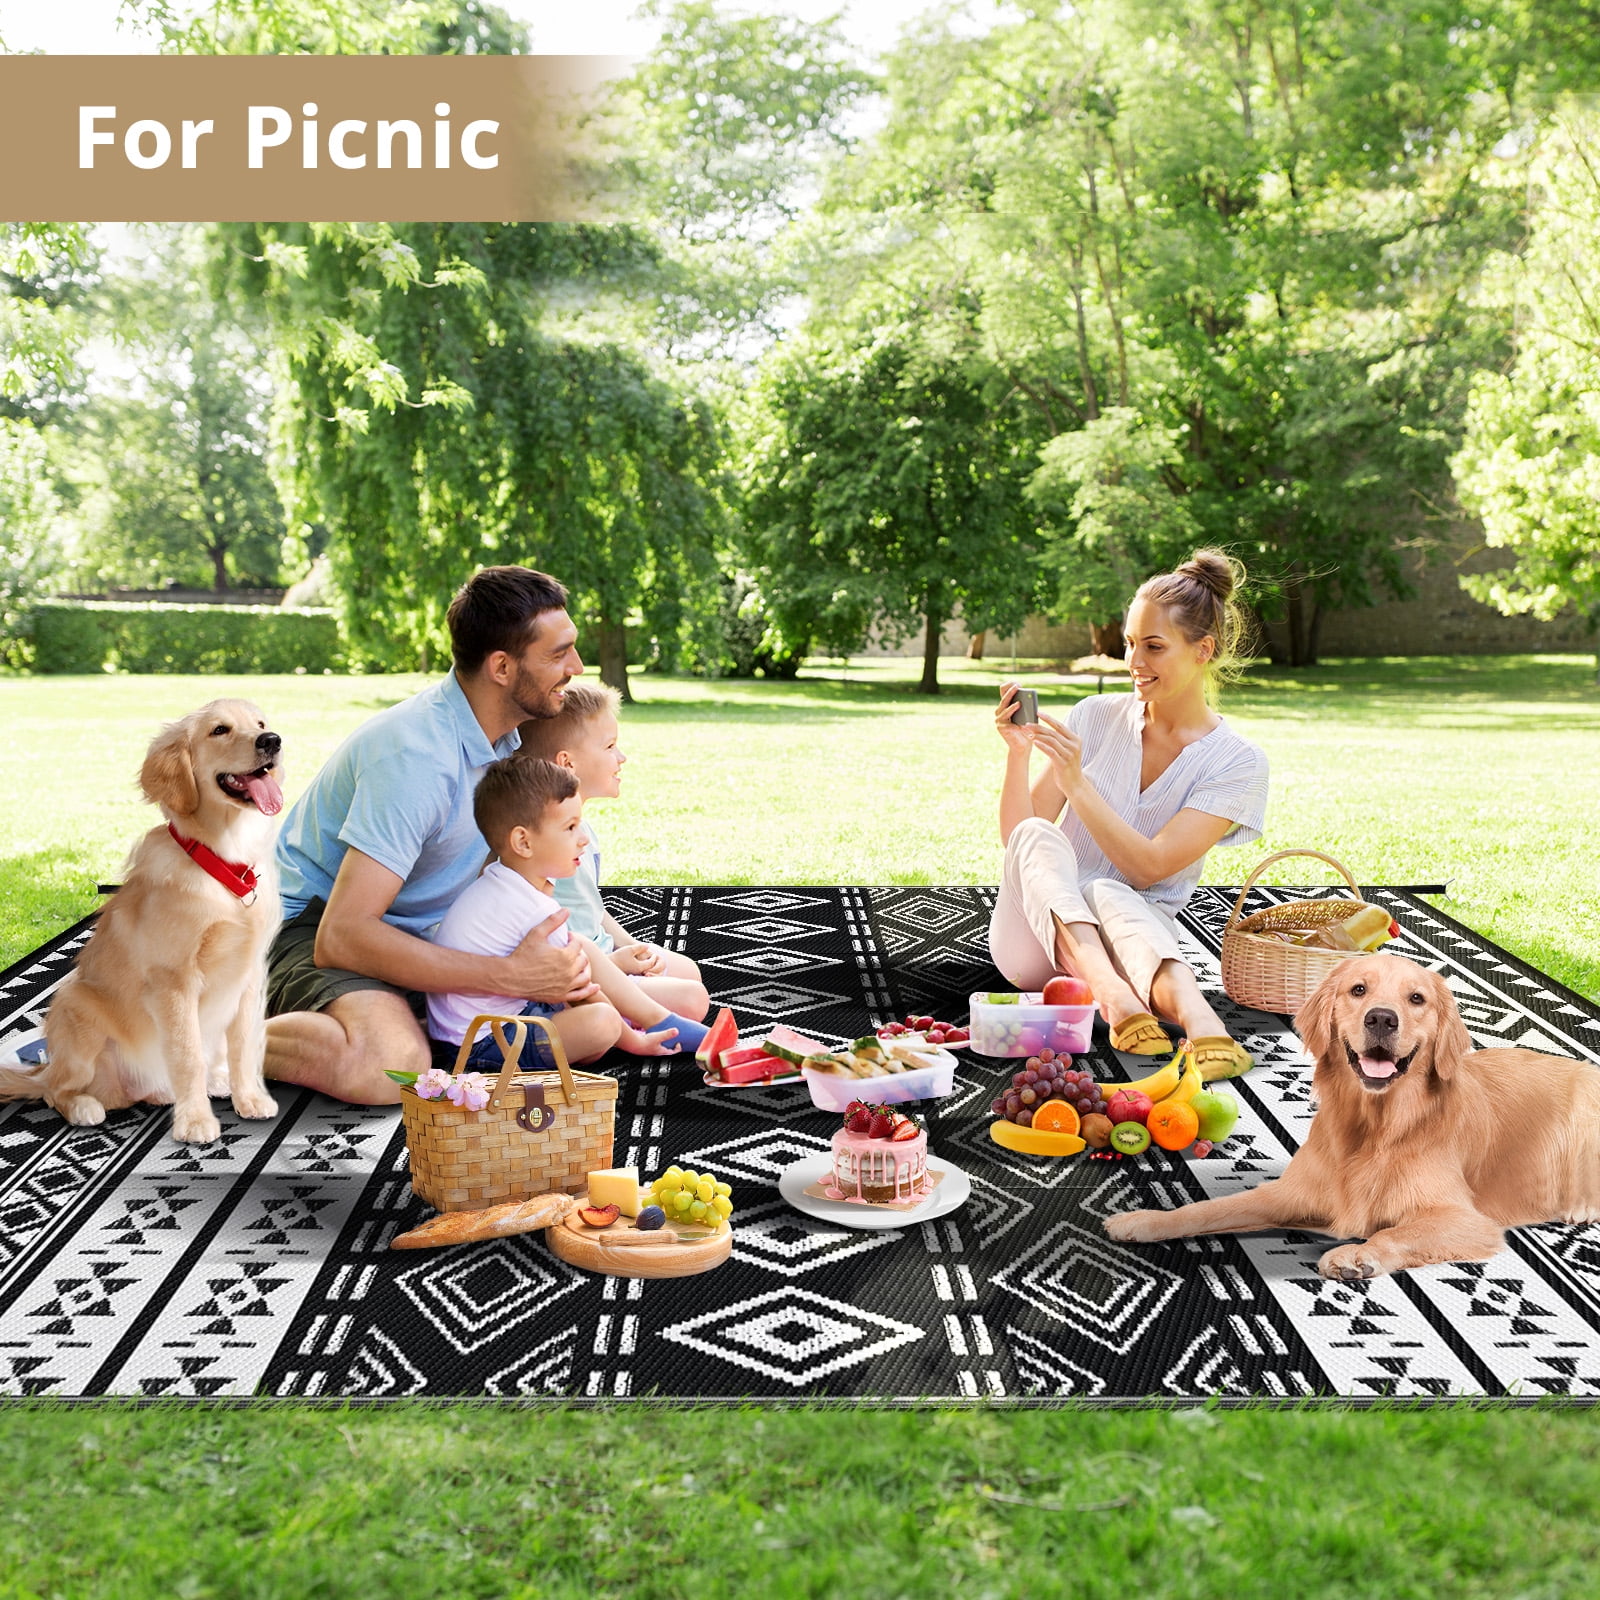 GARTOL 5x8 Outdoor Rug, Plastic Woven Waterproof Rug, Non-Slip Straw Patio  Carpet, Easy CleanIing and Carrying, Weather Resistance Mat for Garden